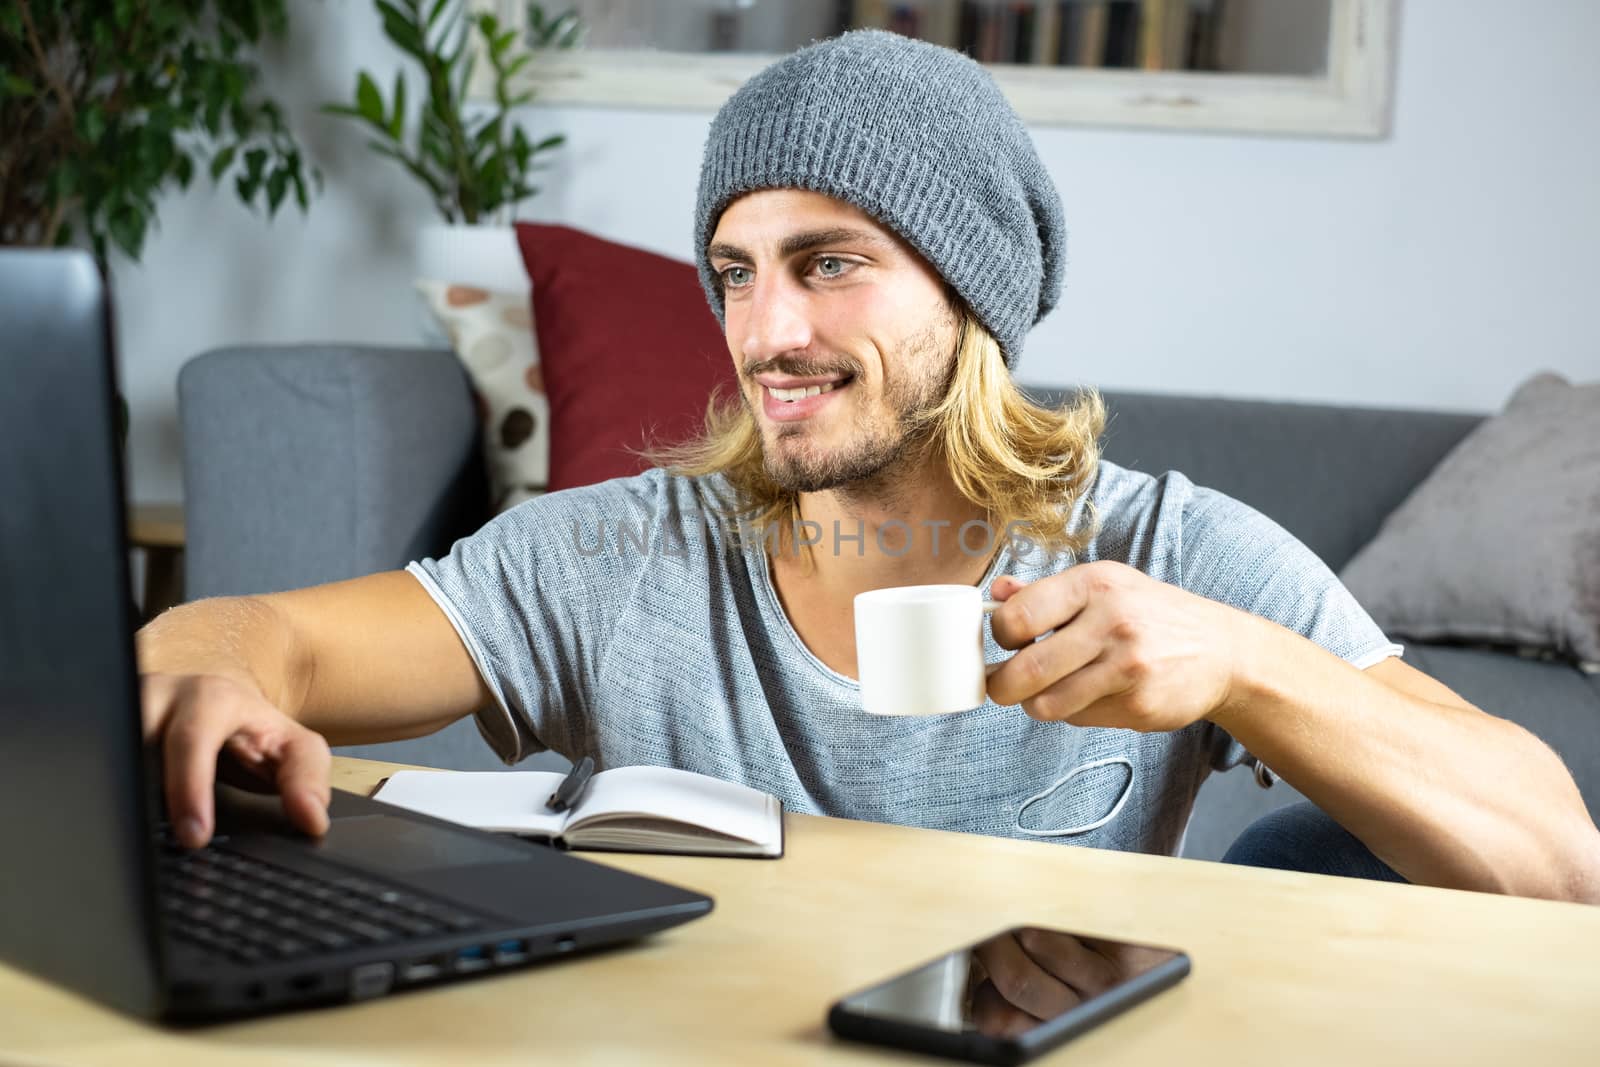 Handsome young caucasian man using computer working at home and talking with mobile feeling happy with smile showing teeth